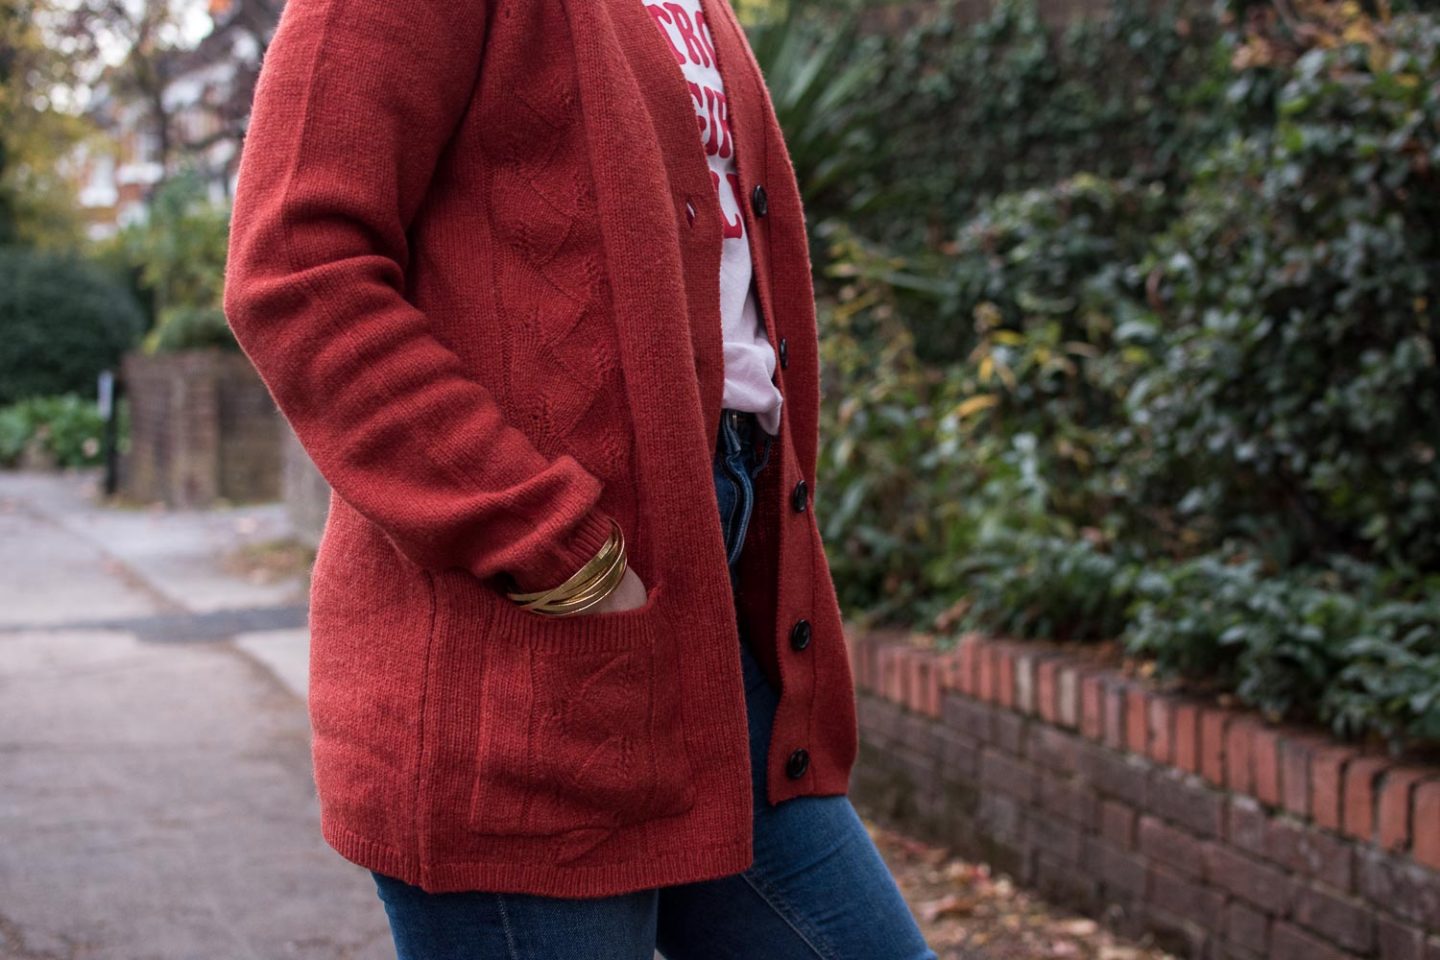 Fashion Blogger Karen Maurice of n4mummy in a organic cotton wool cardigan from Thought, affordable ethical clothing